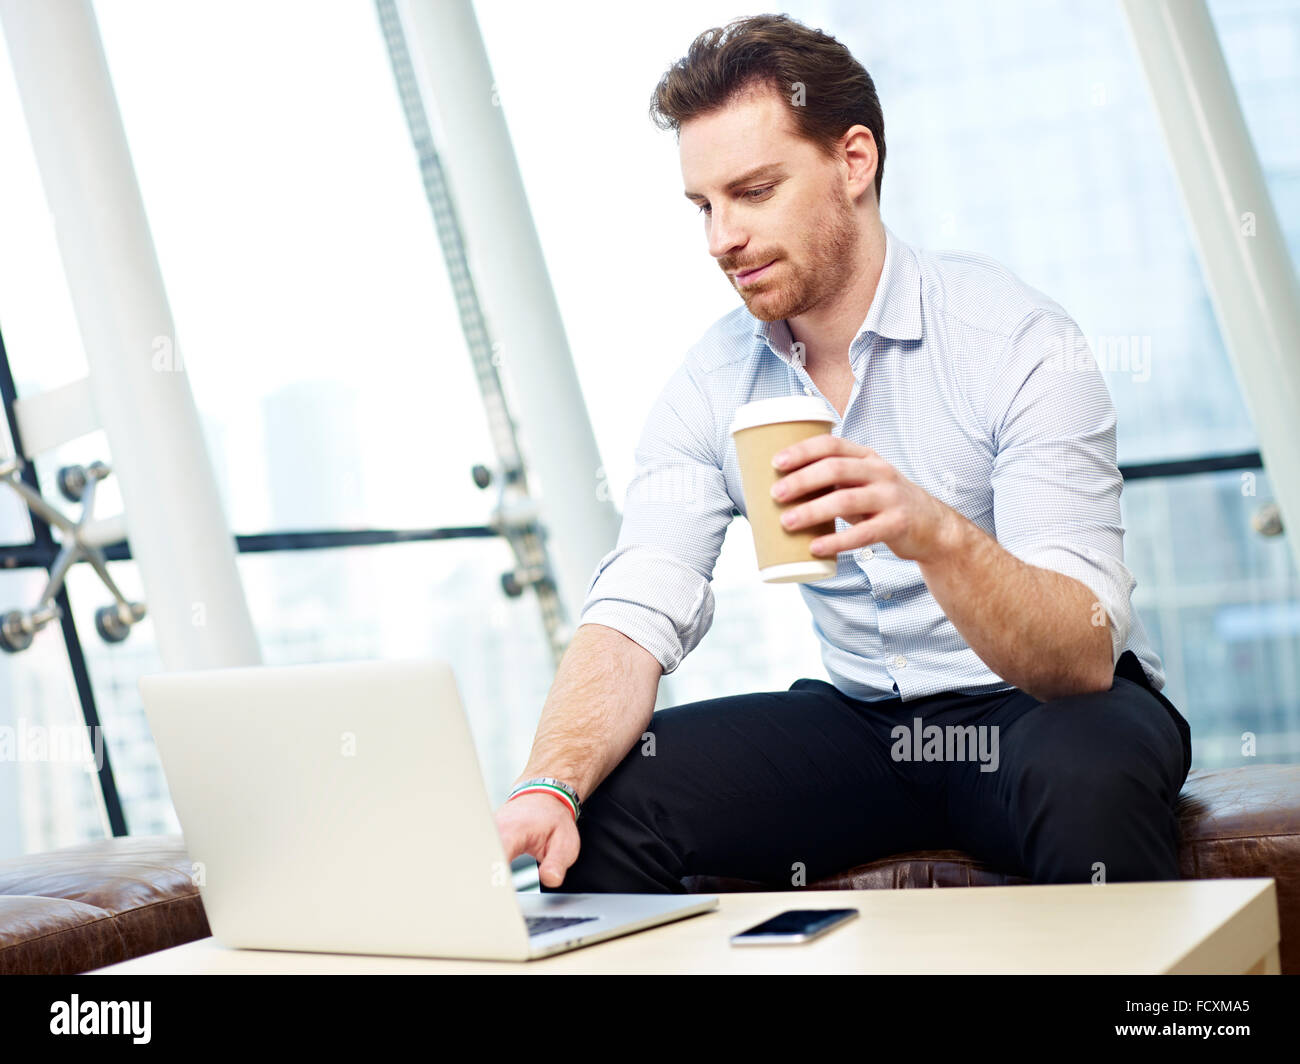 young business executive working on laptop computer hold a cup of coffee in modern office. Stock Photo